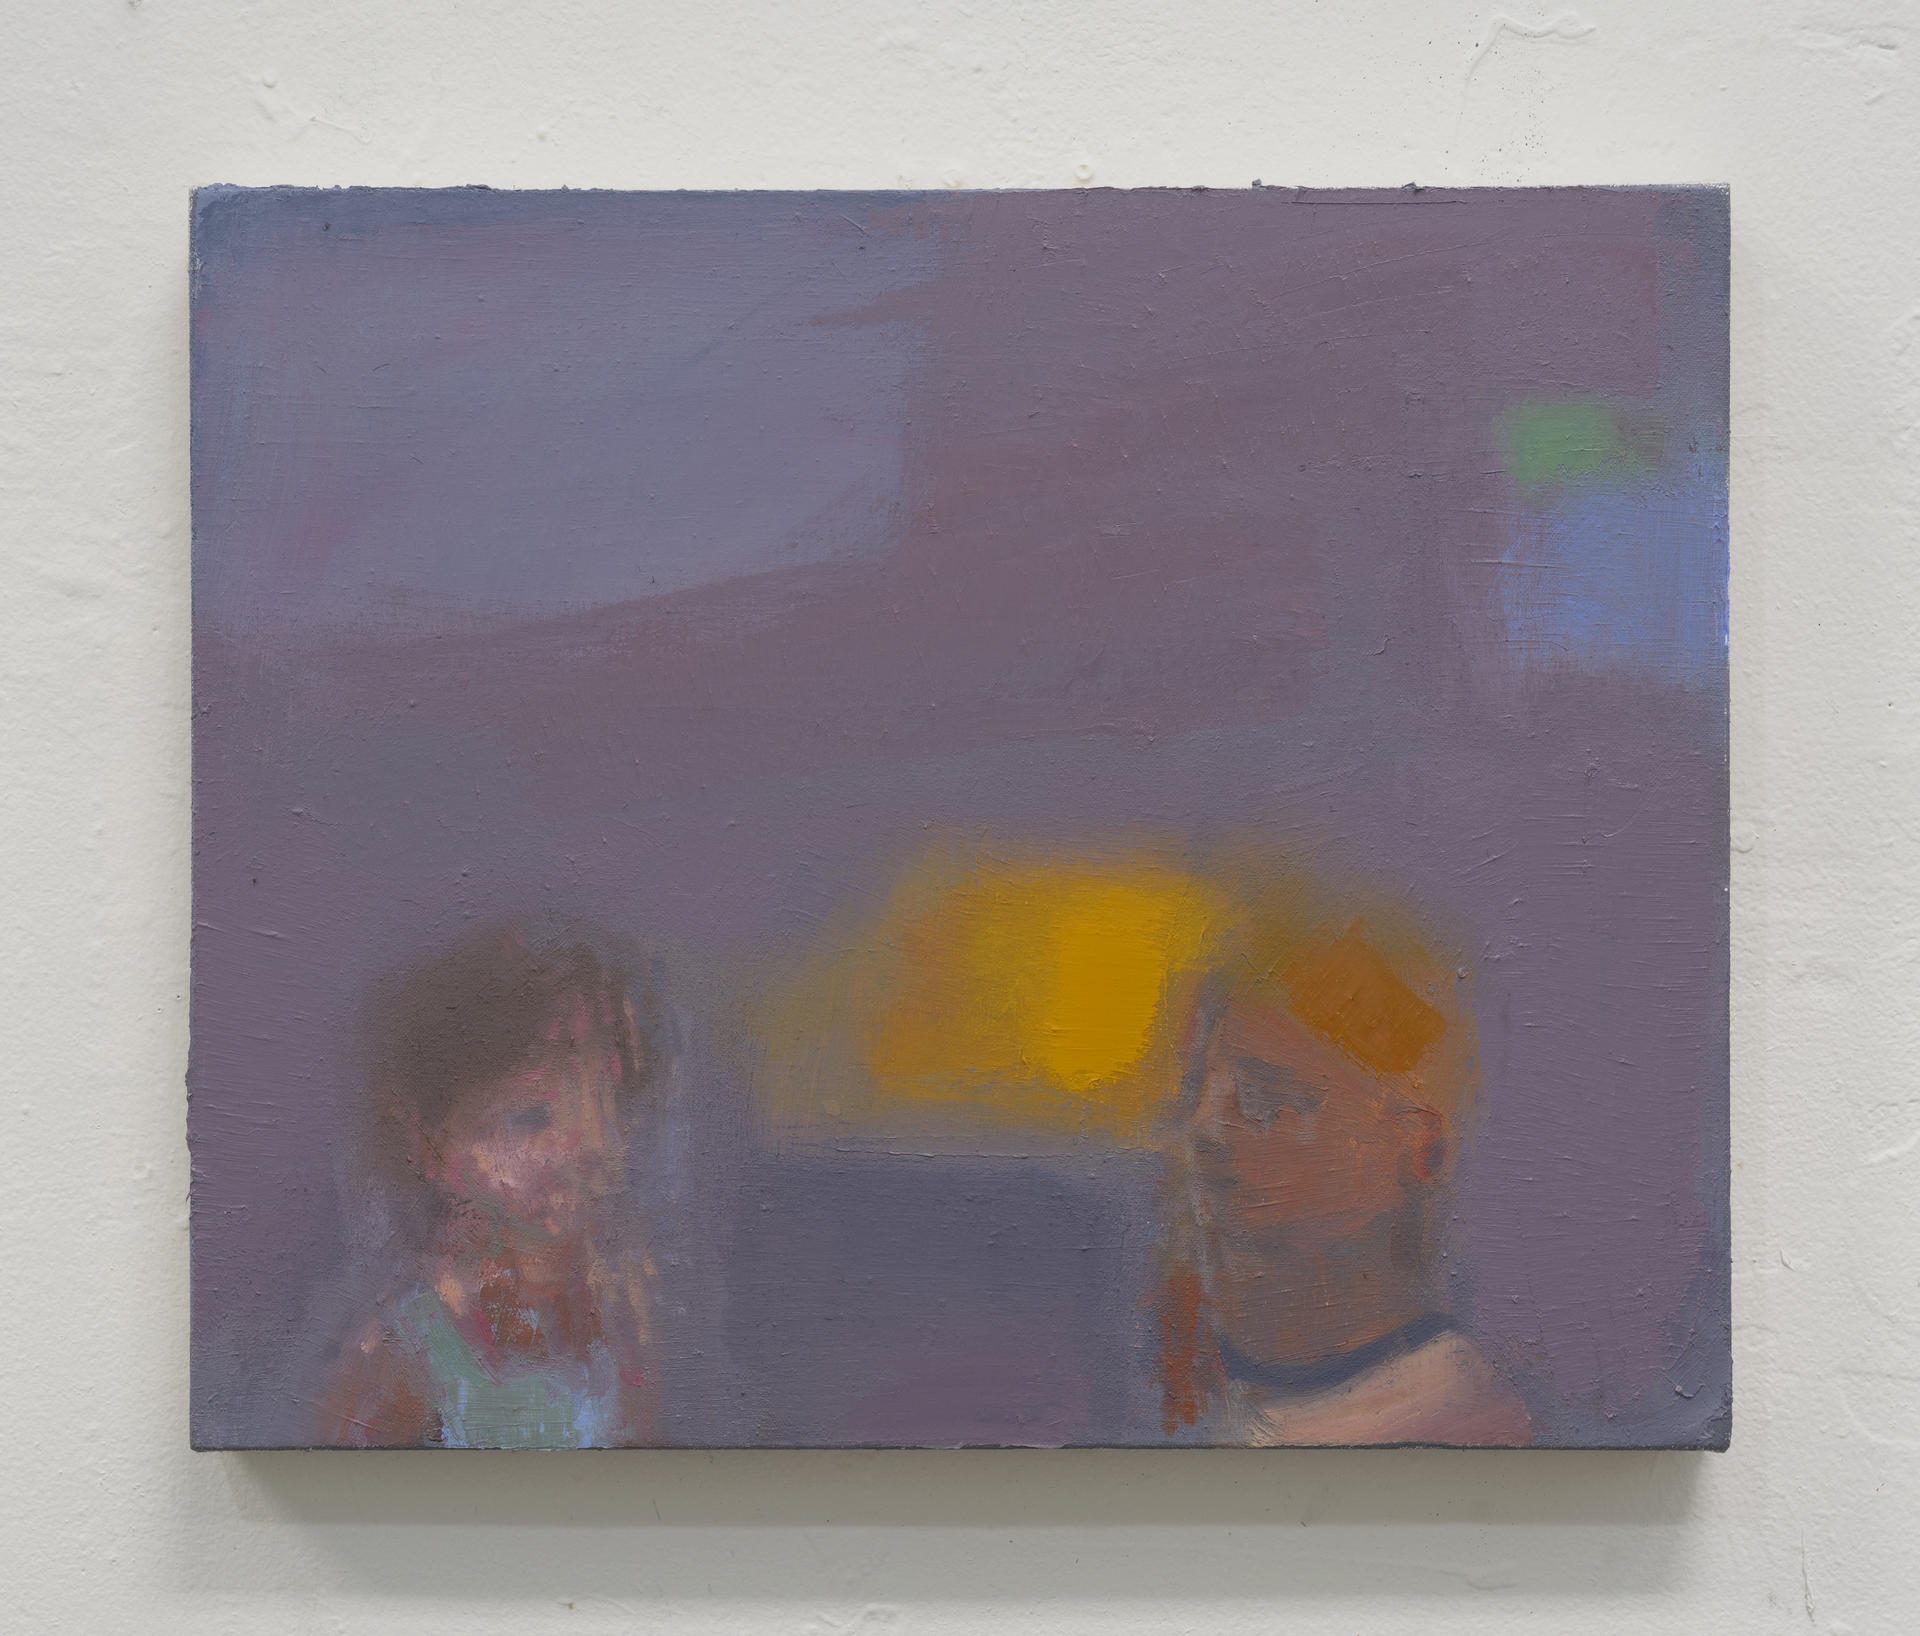 A gray-purple painting with two figures speaking to one another